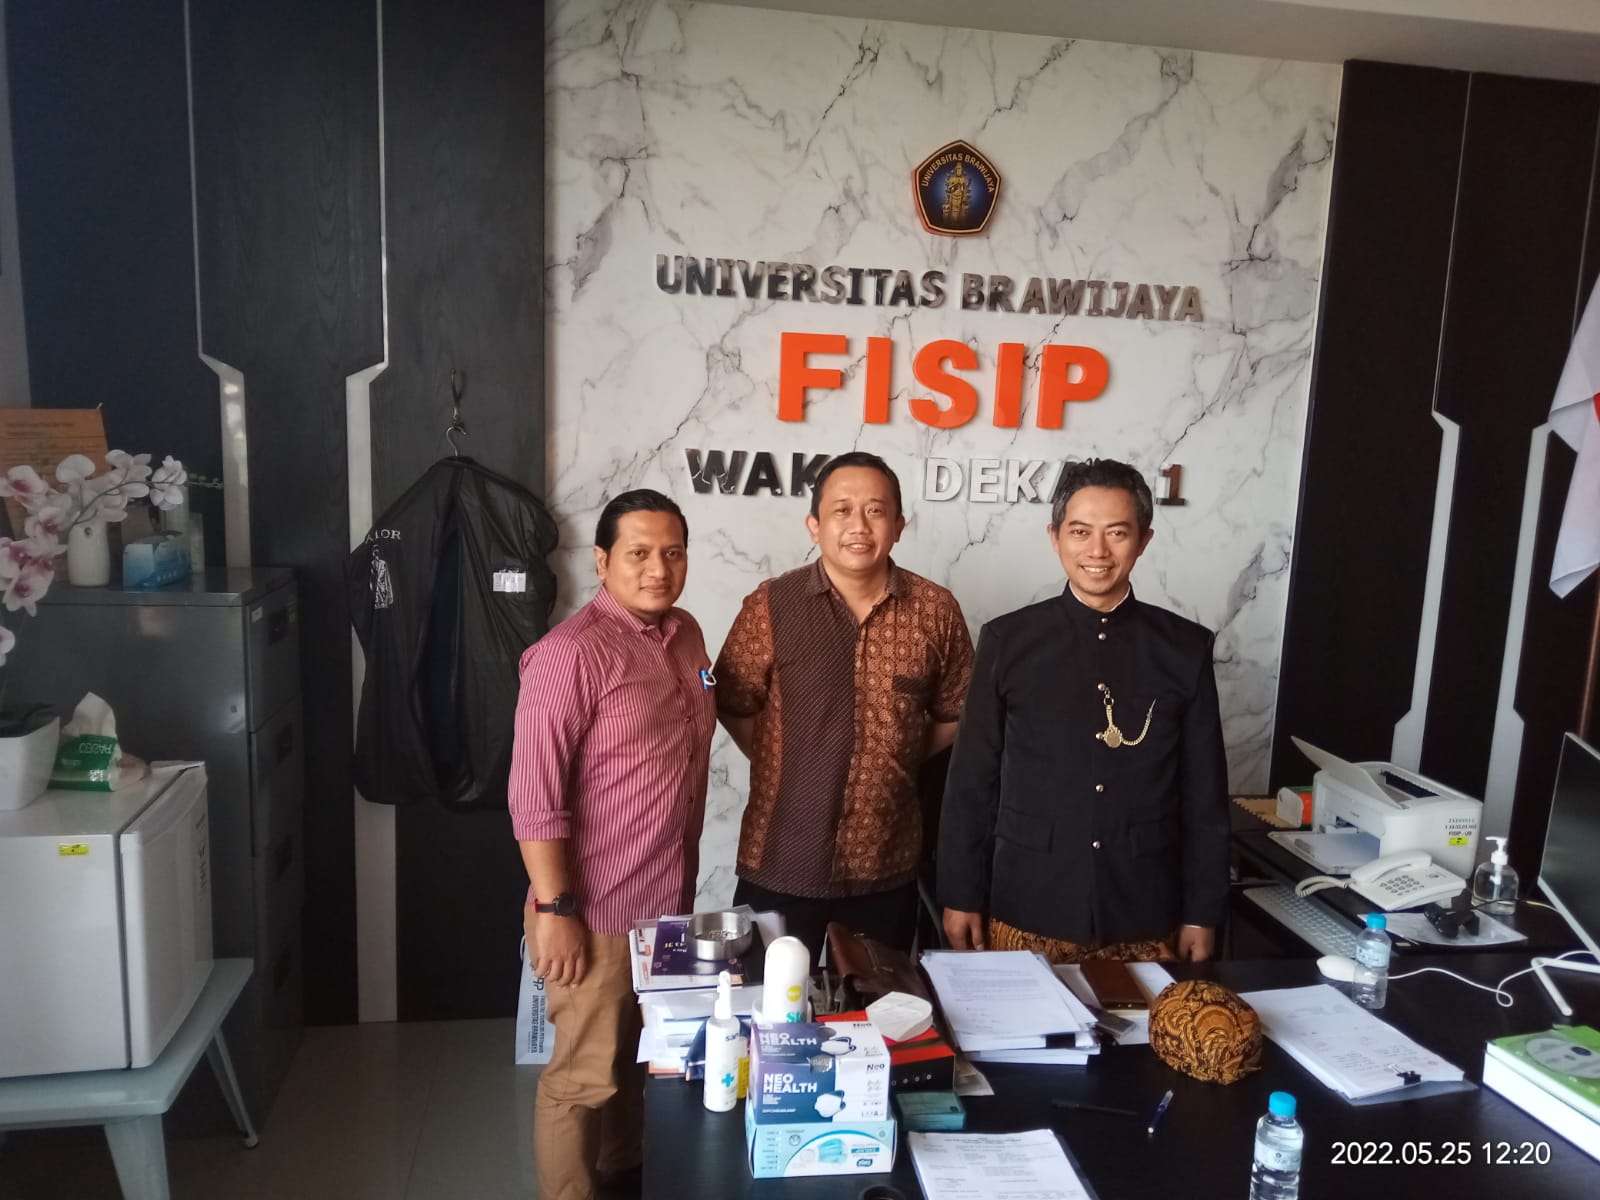 Political Science of Udayana University Conducts Scoping of Cooperation with Political Science of Brawijaya University